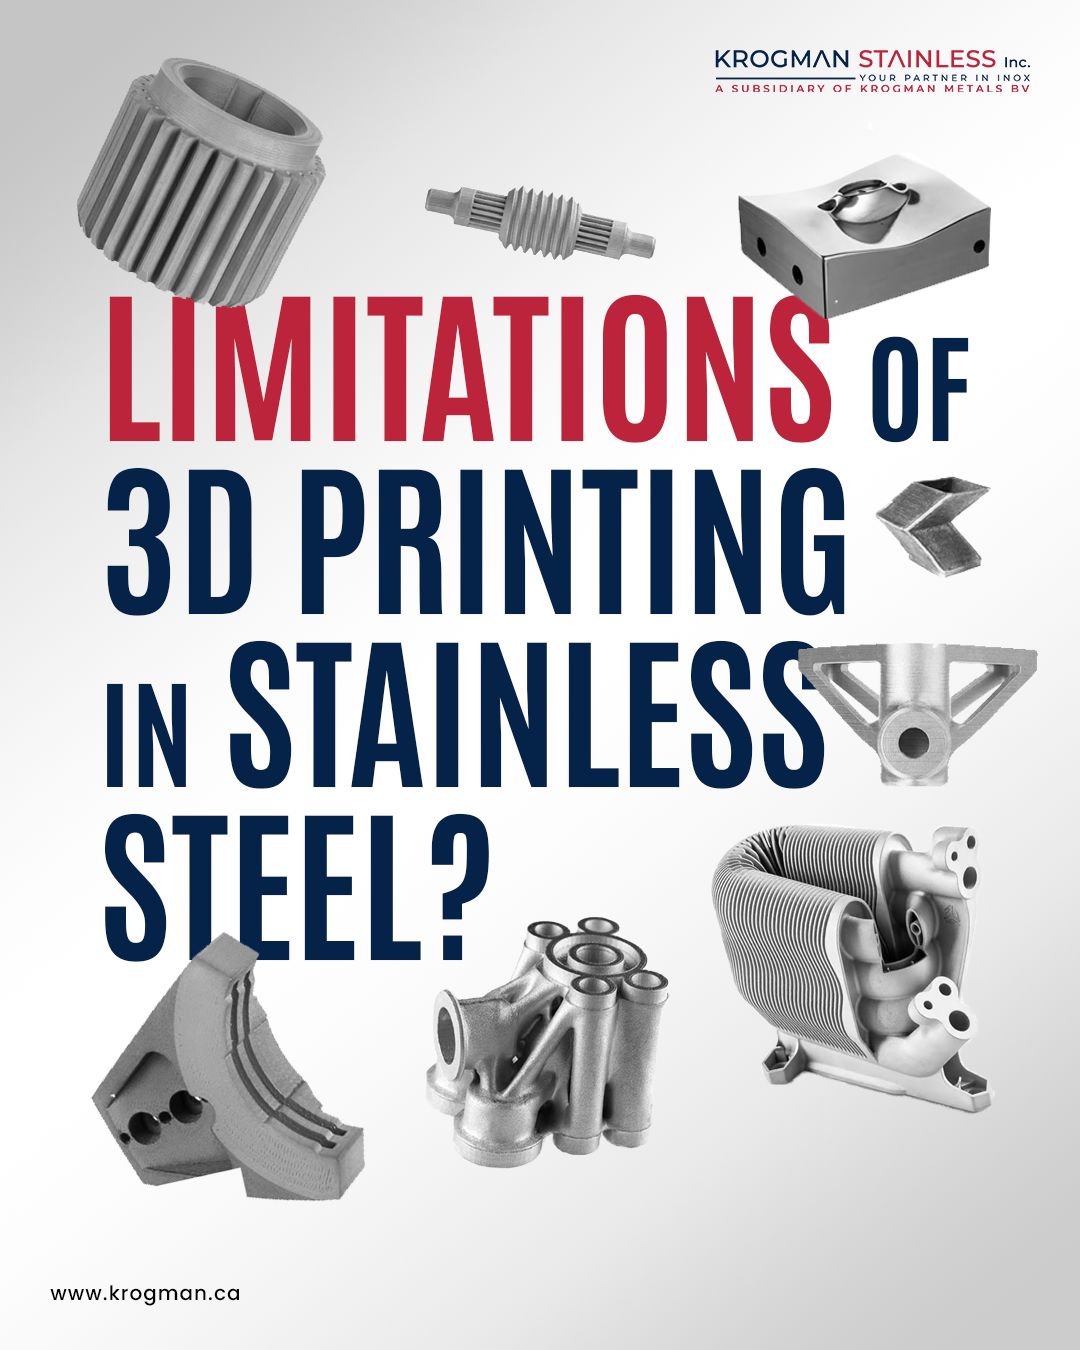 Limitations of 3D Printing in Stainless Steel